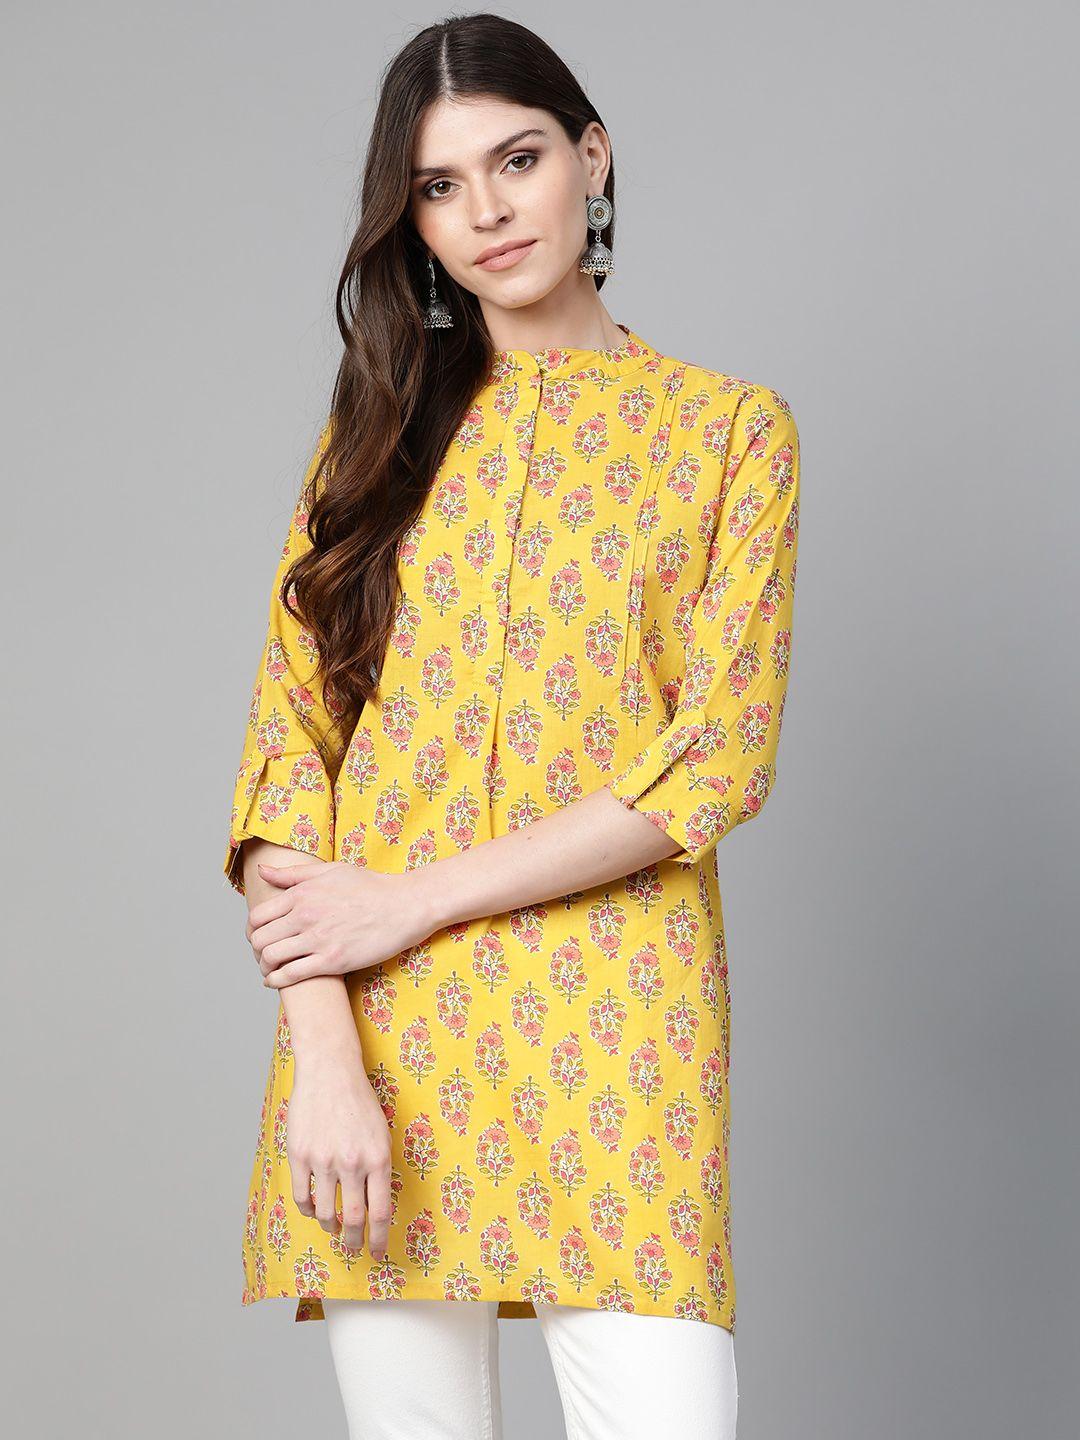 bhama-couture-women-mustard-yellow-&-pink-floral-print-tunic